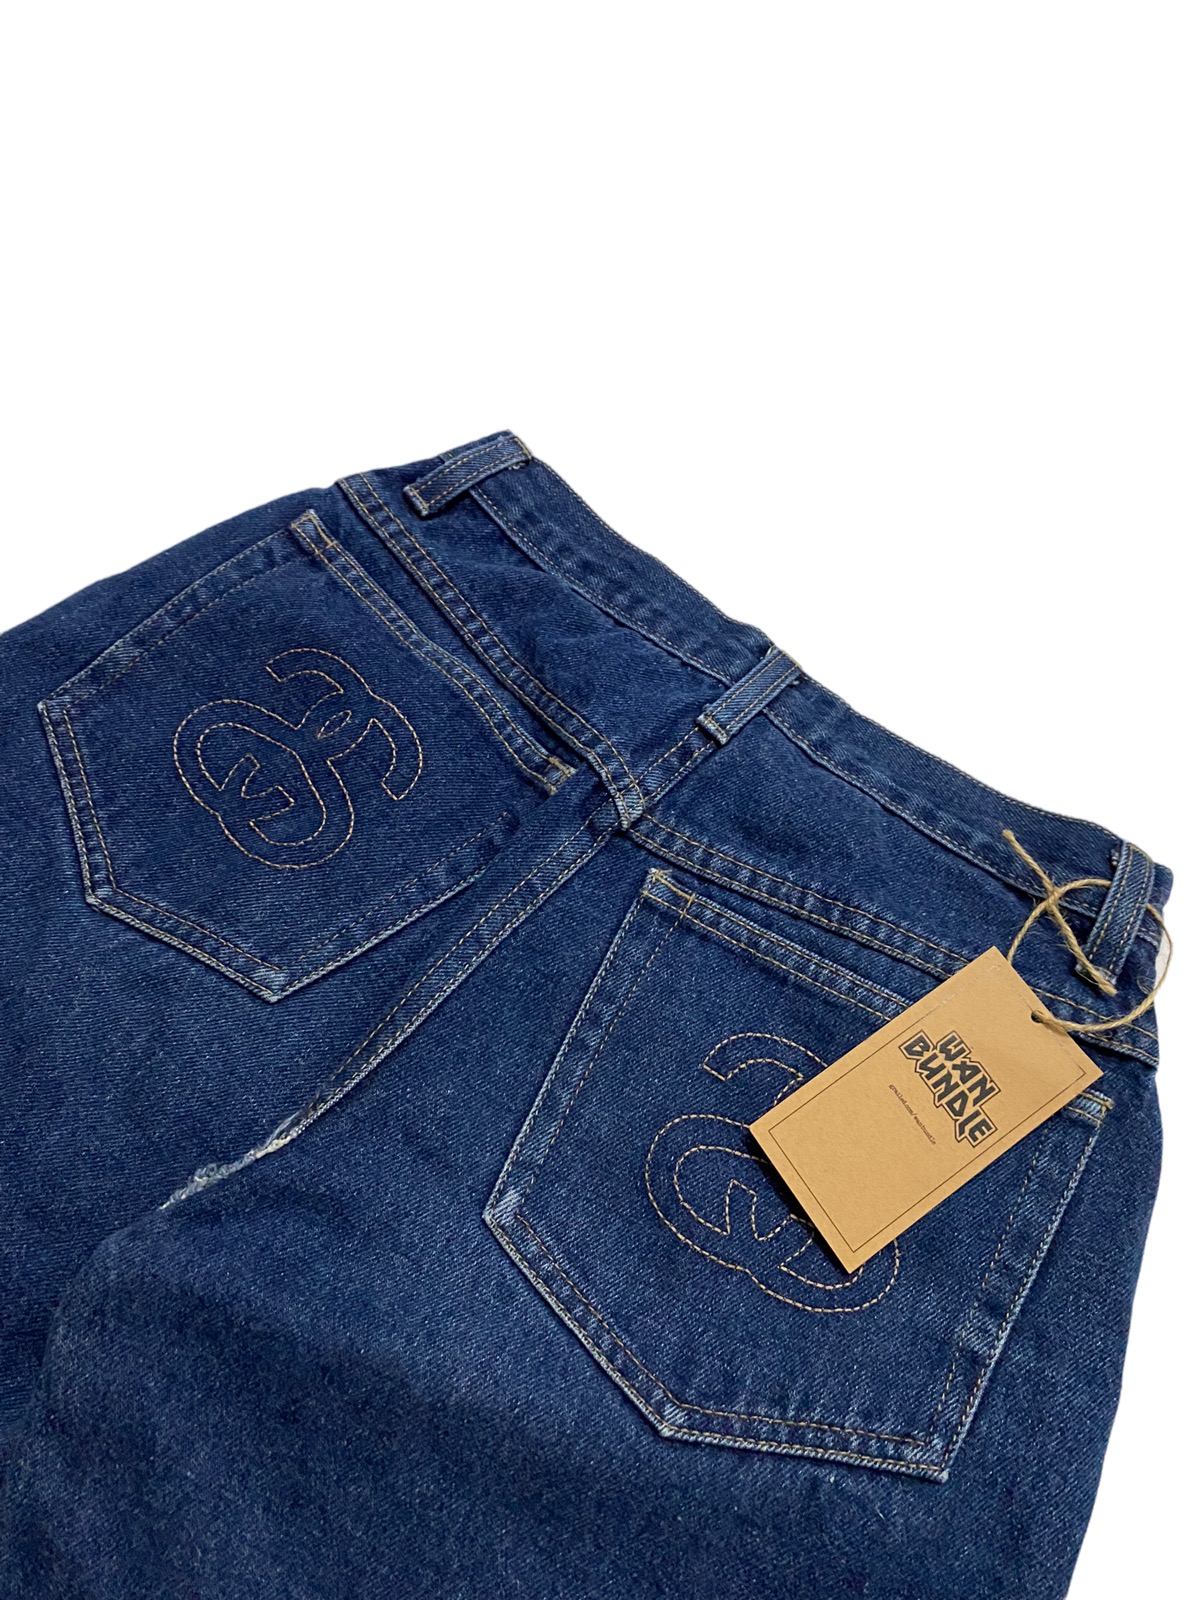 Vintage Stussy Short Jeans Made in USA - 11